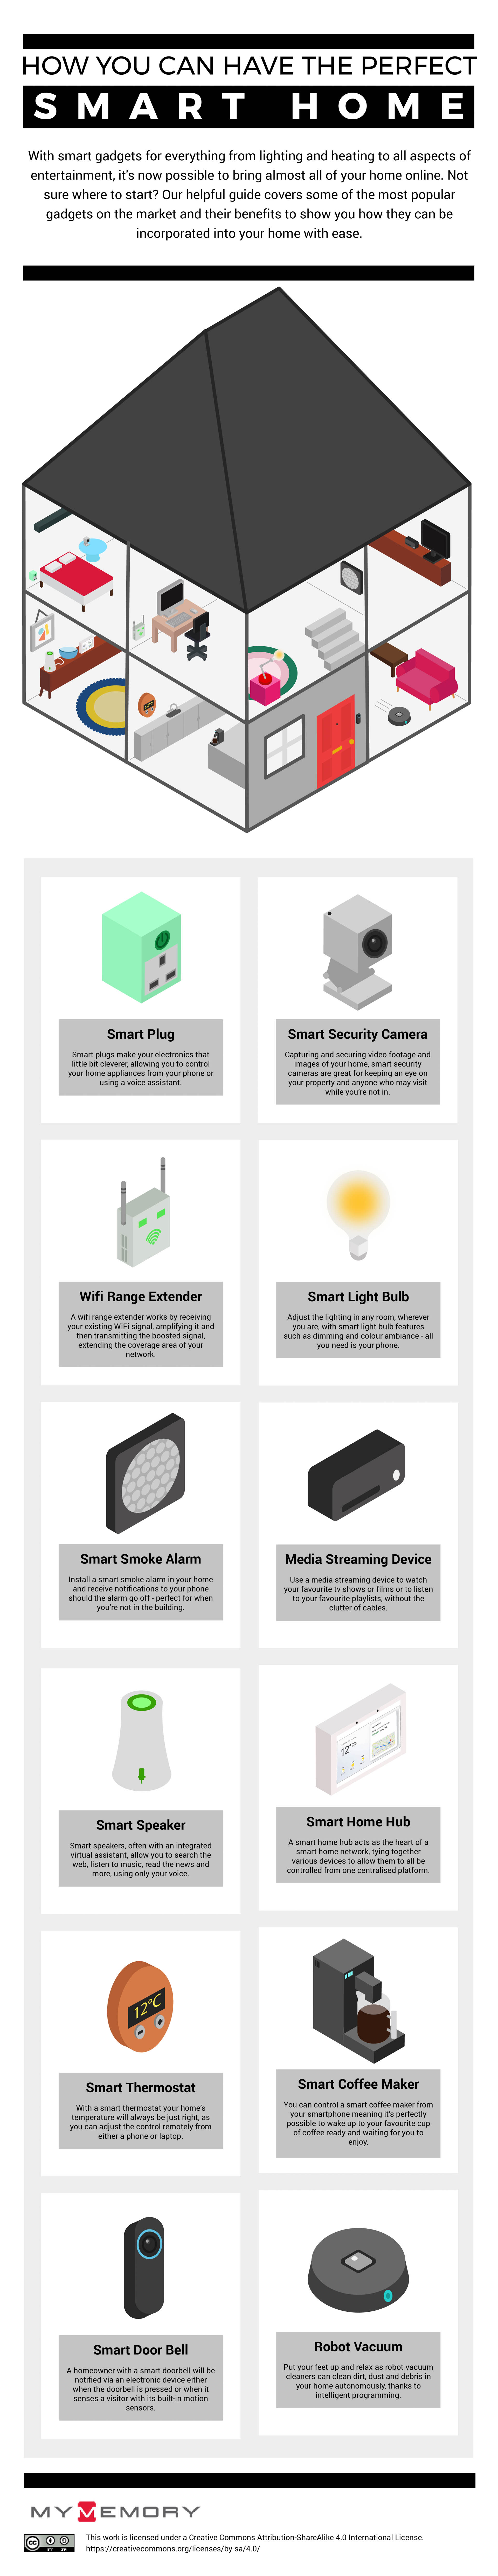 Infographic: How You Can Have the Perfect Smart Home: Image: MyMemory.